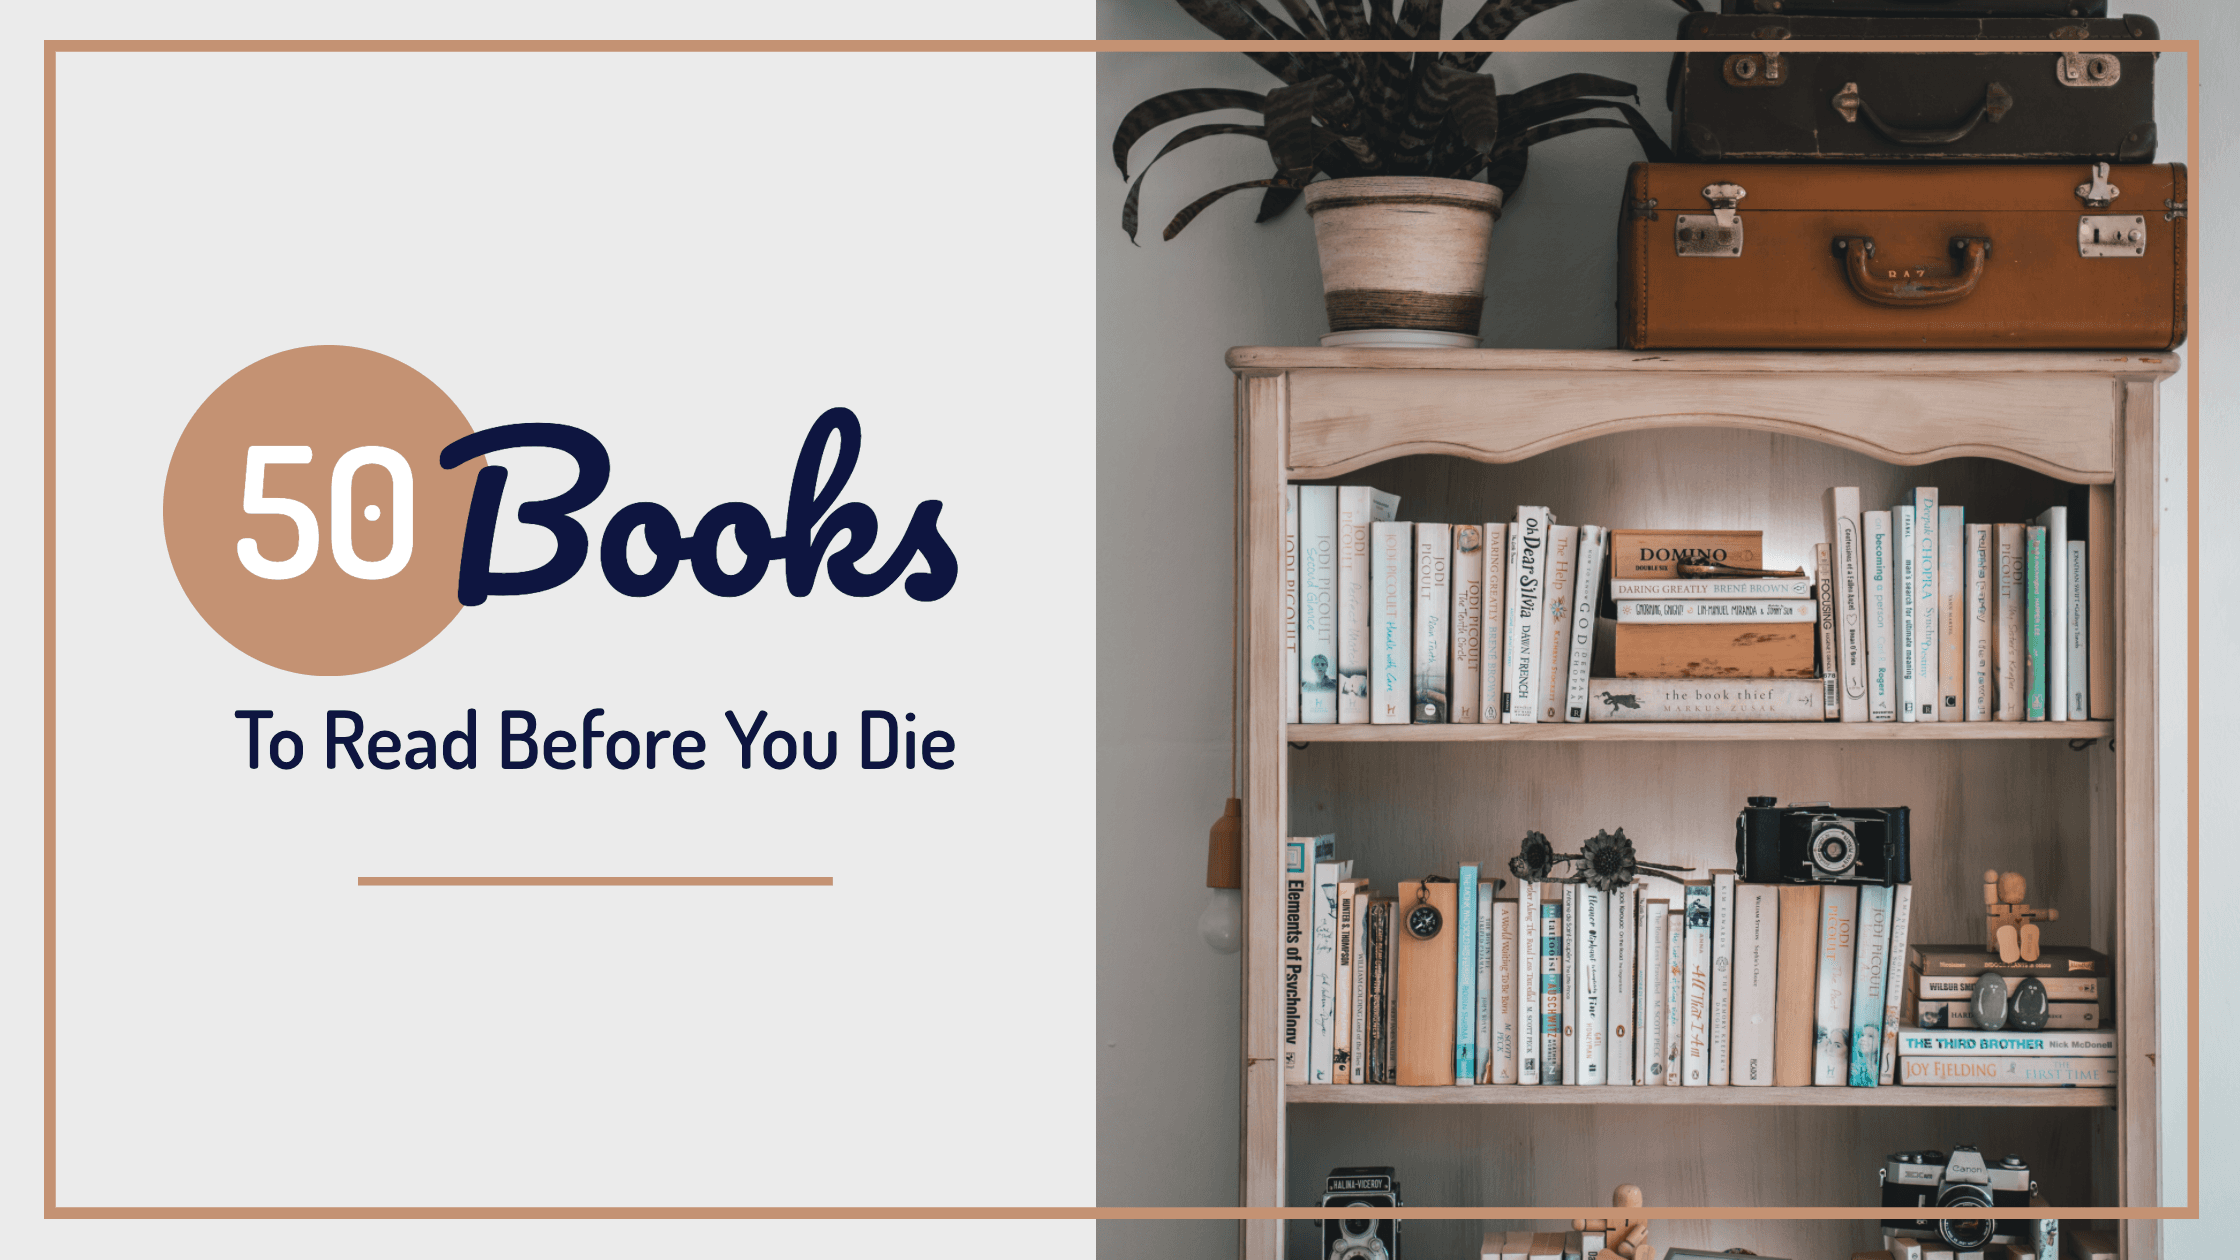 top-books-decorated-in-bookshelf-to-read-in-life-blog-banner-template-thumbnail-img